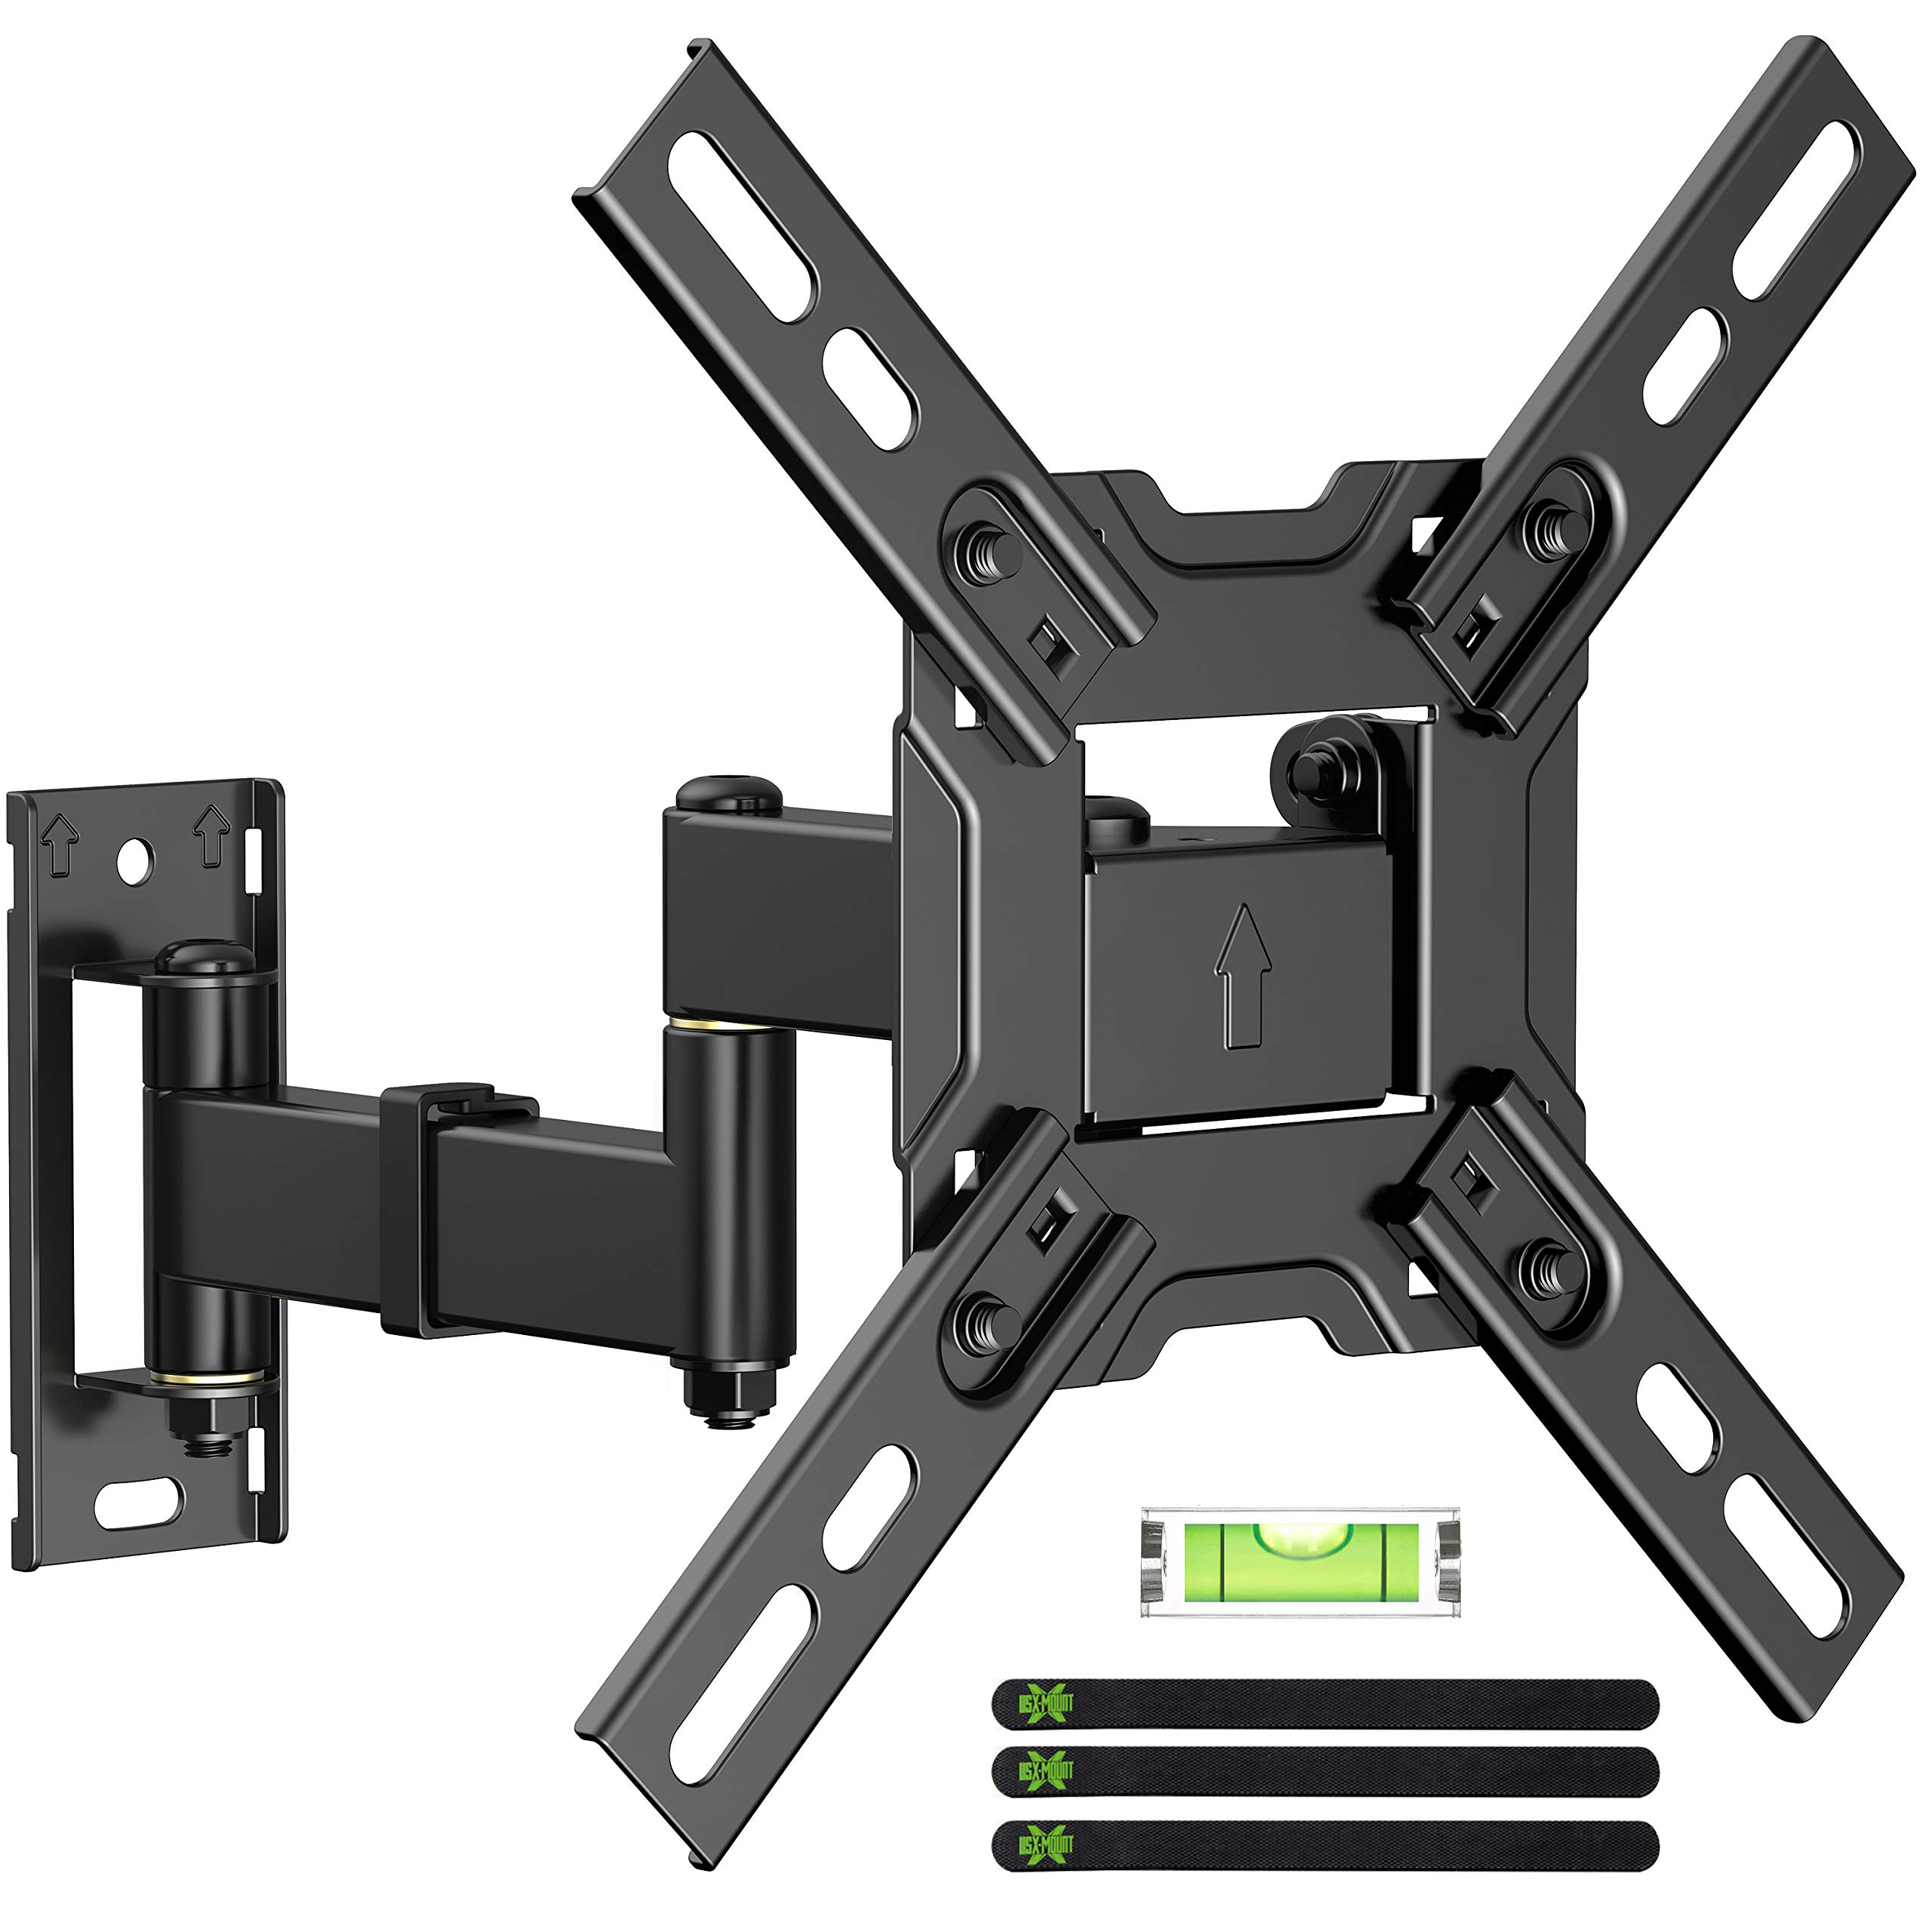 USX MOUNT Full Motion TV Wall Mount Swivel and Tilt, TV Mount with Articulating Arms for Most 13-32 inch LED LcD Monitor Screen,